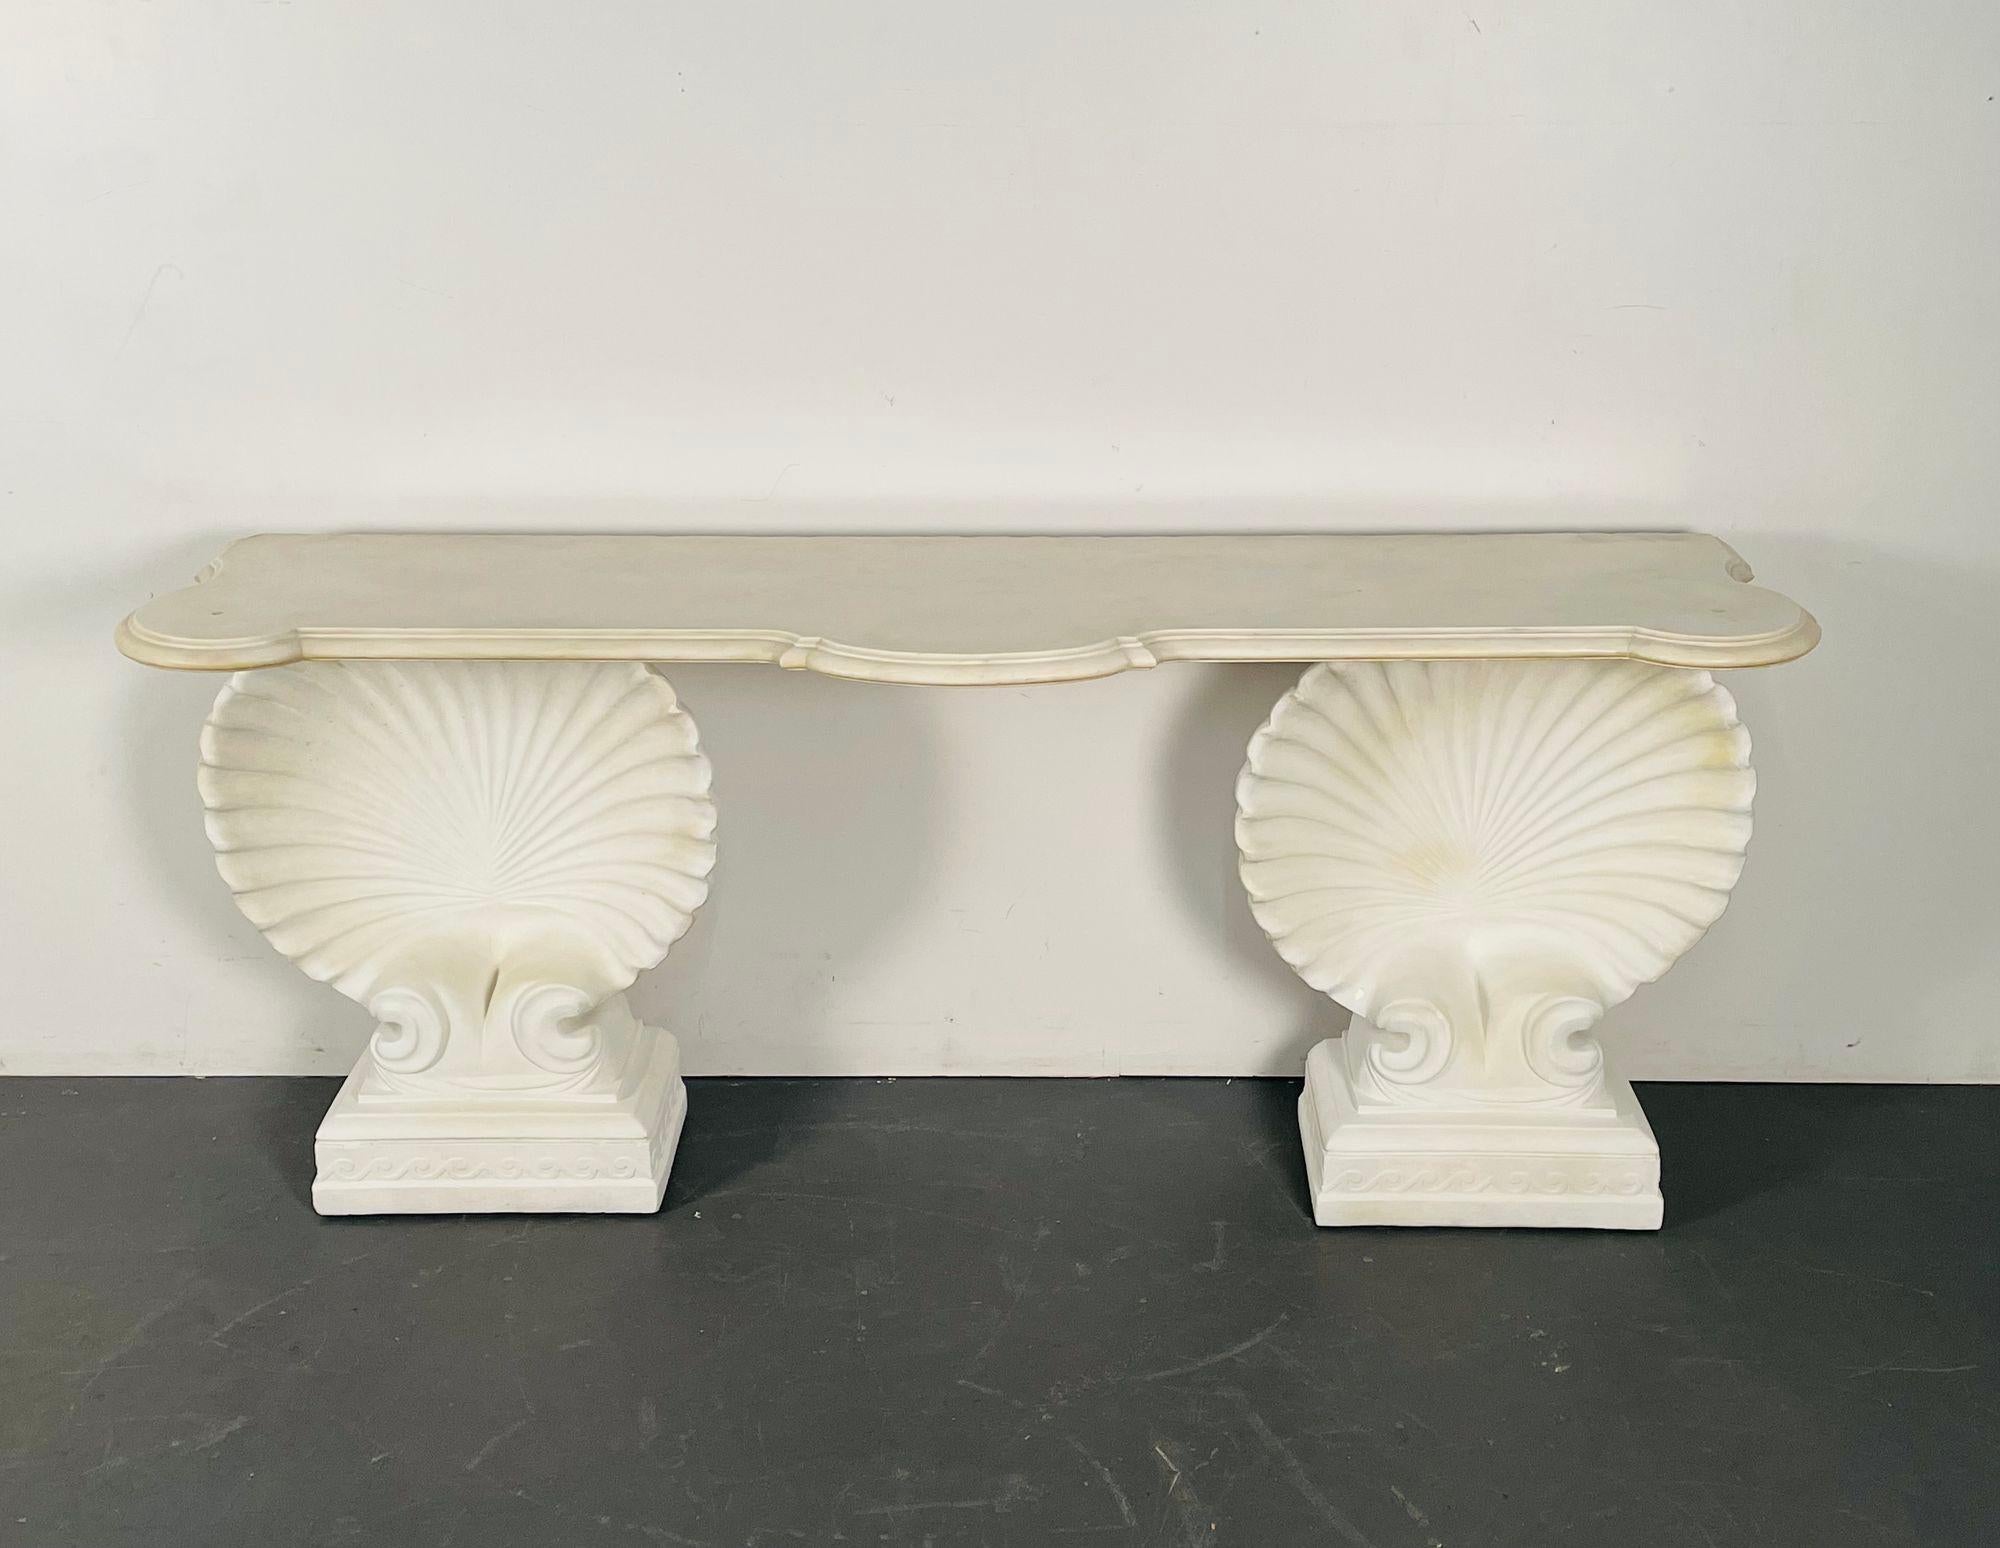 Shell console table, marble, stone, Early 20th Century, Custom Made.

A pair of large shell form pedestals having square carved bases supporting a large serpentine Carrara white marble top with a deep scalloped edge. An impressive piece that can be